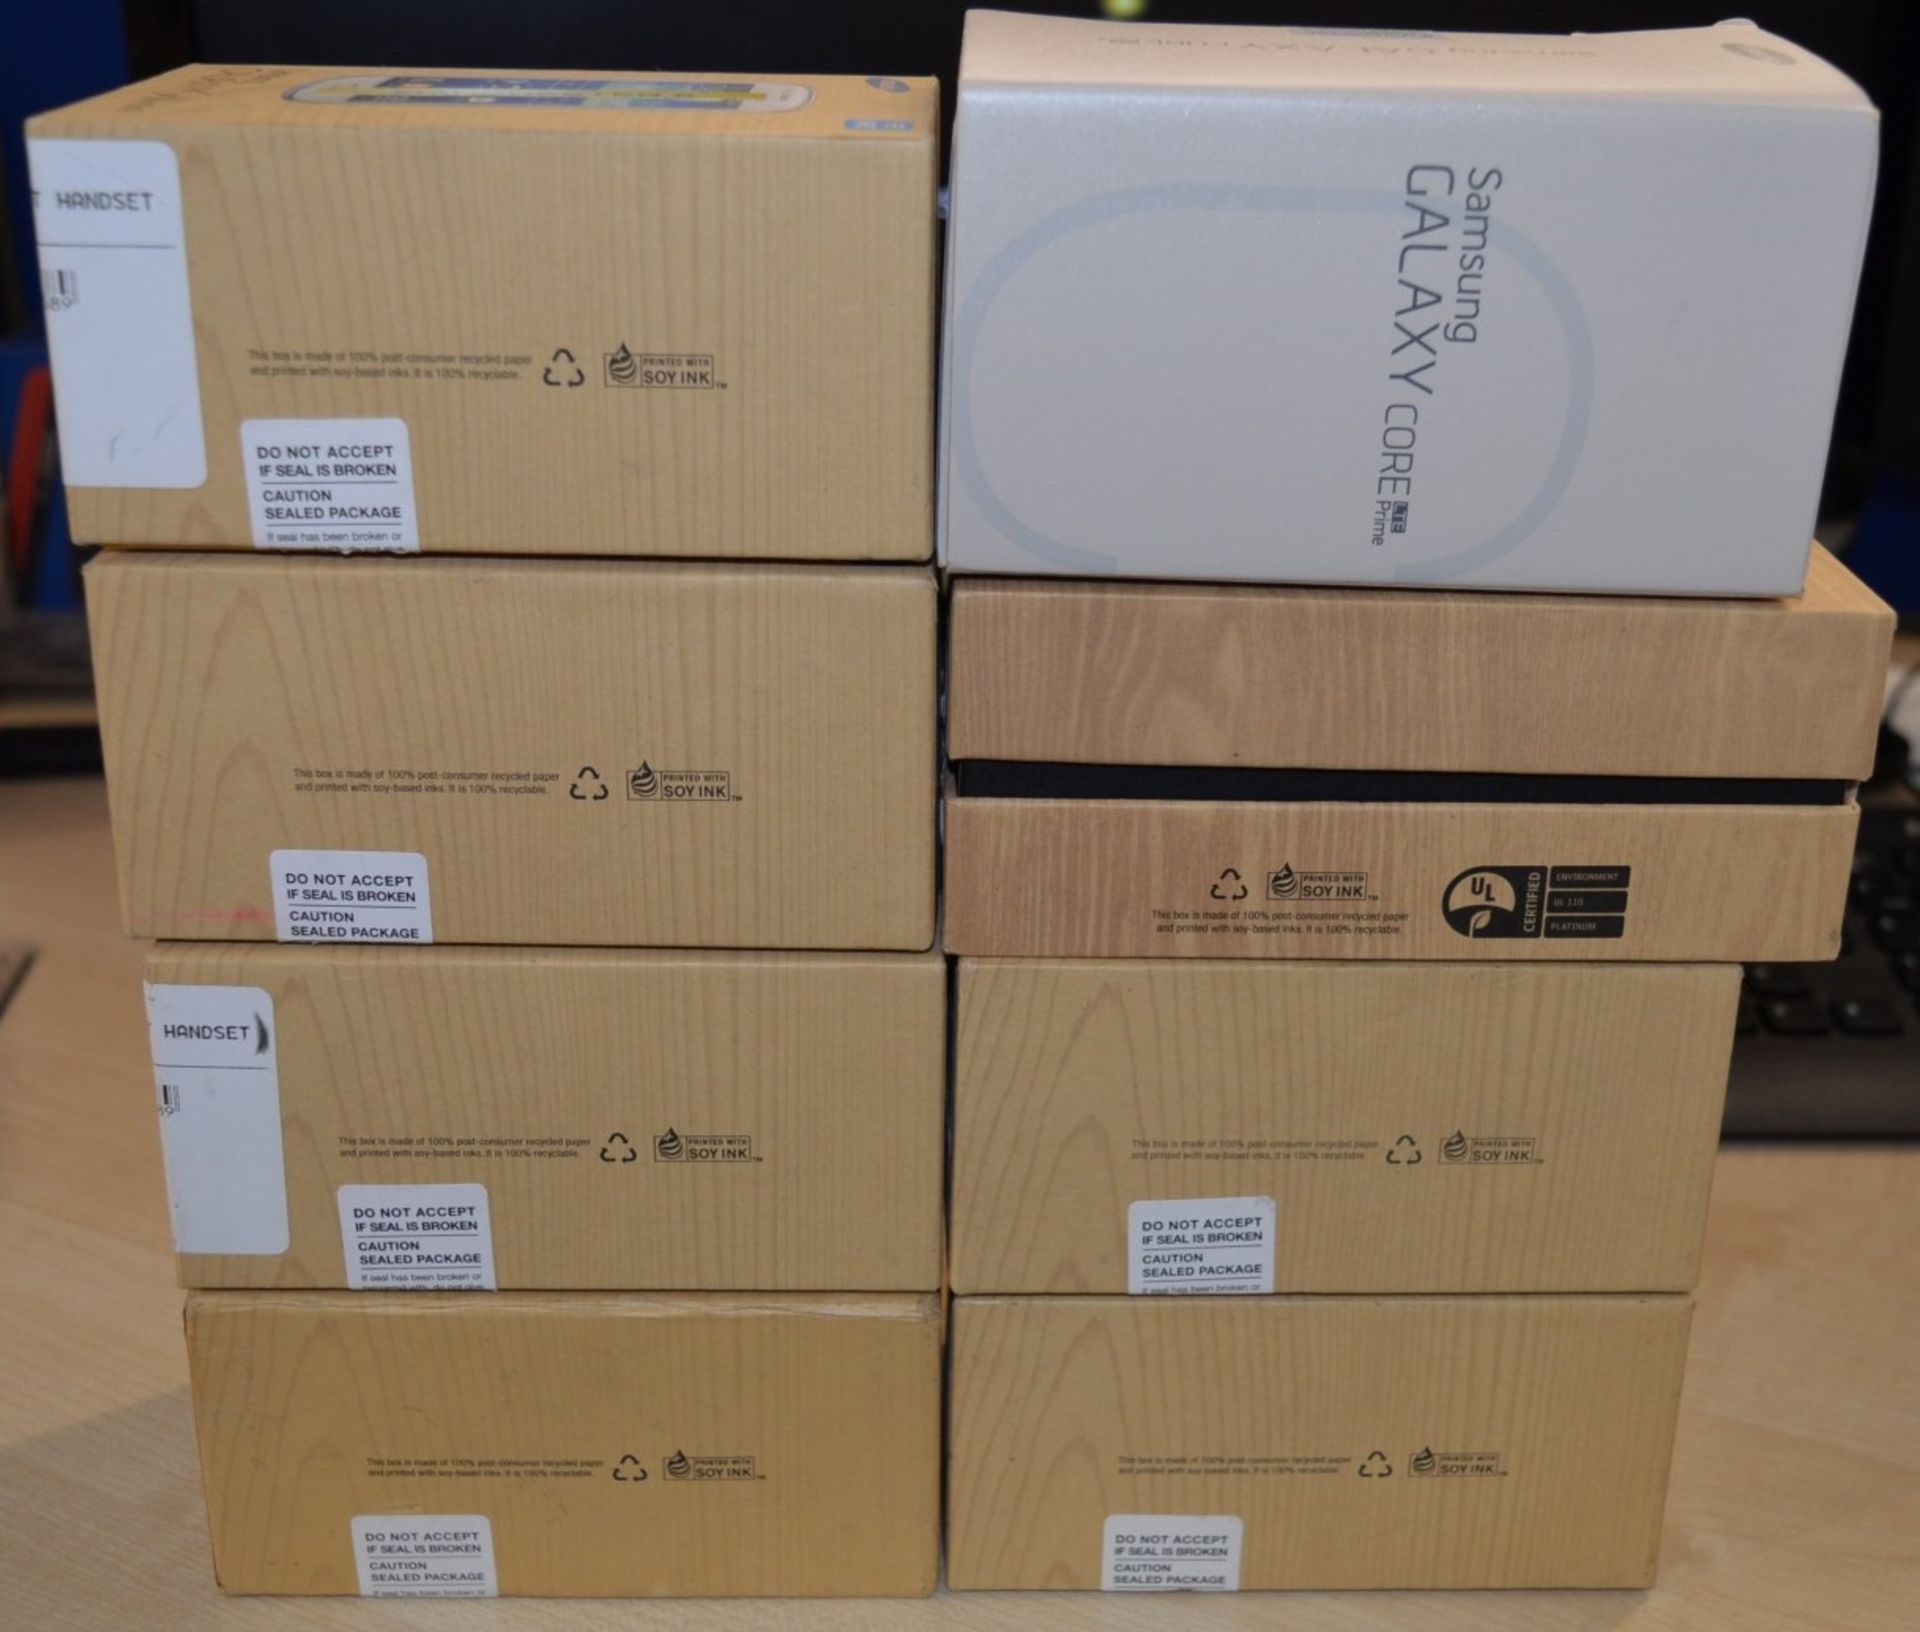 8 x Empty Samsung Galaxy Mobile Phone Retail Boxes - CL300 - Includes 6 x Galaxy S3 Mini, 1 x Galaxy - Image 2 of 2